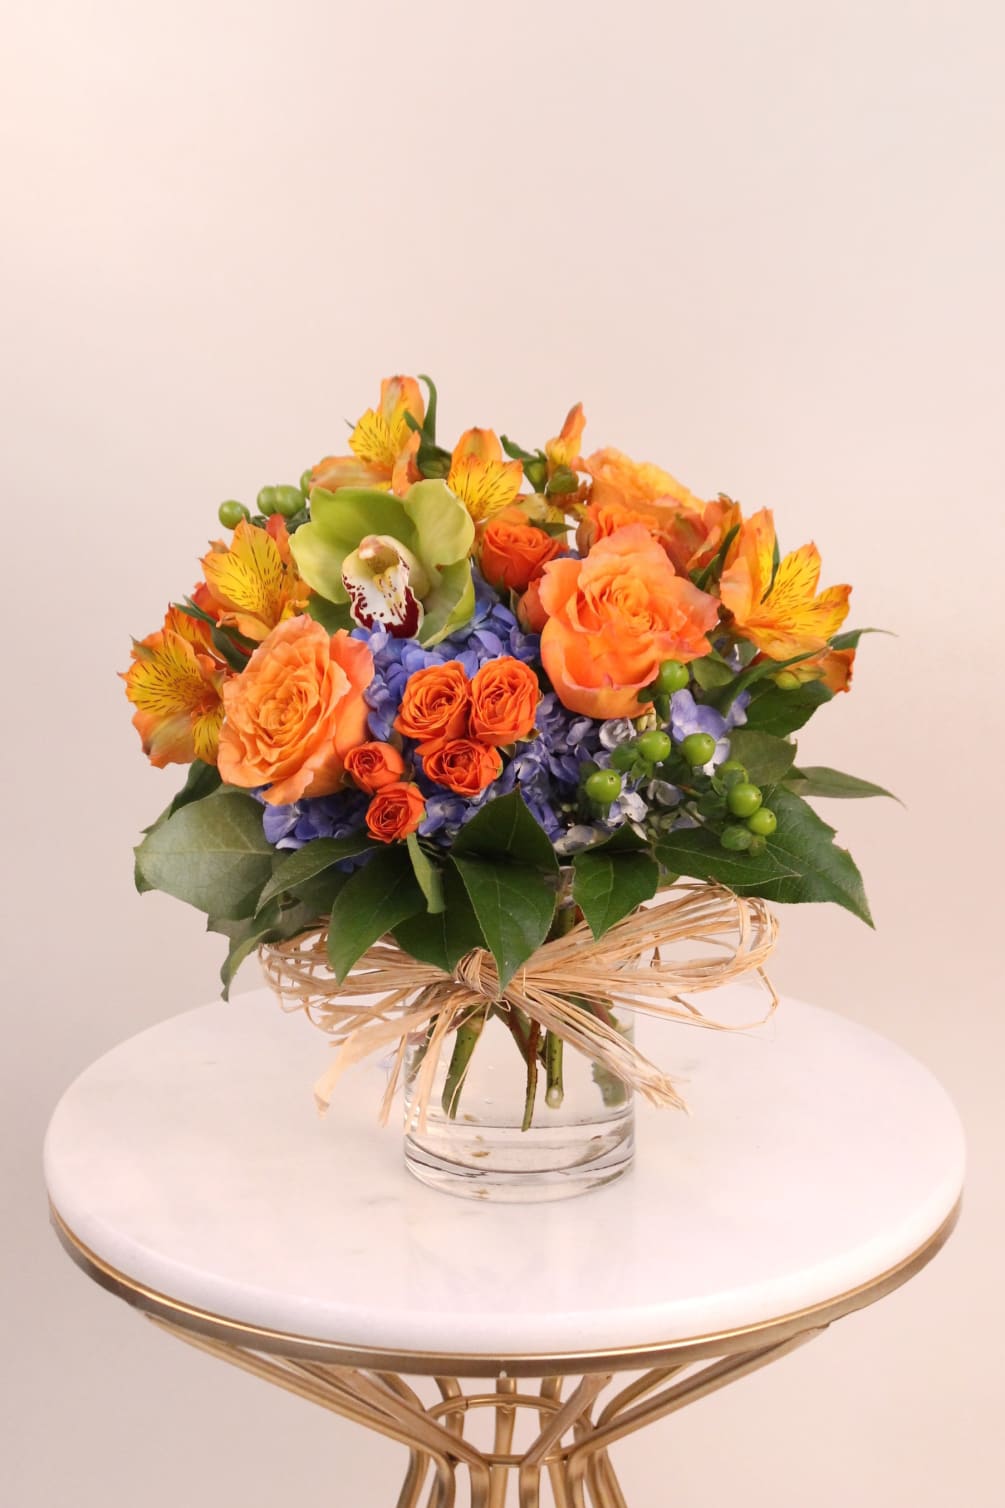 A bright and cheerful arrangement of hydrangeas, roses, orchid, alstromeria, and coffee